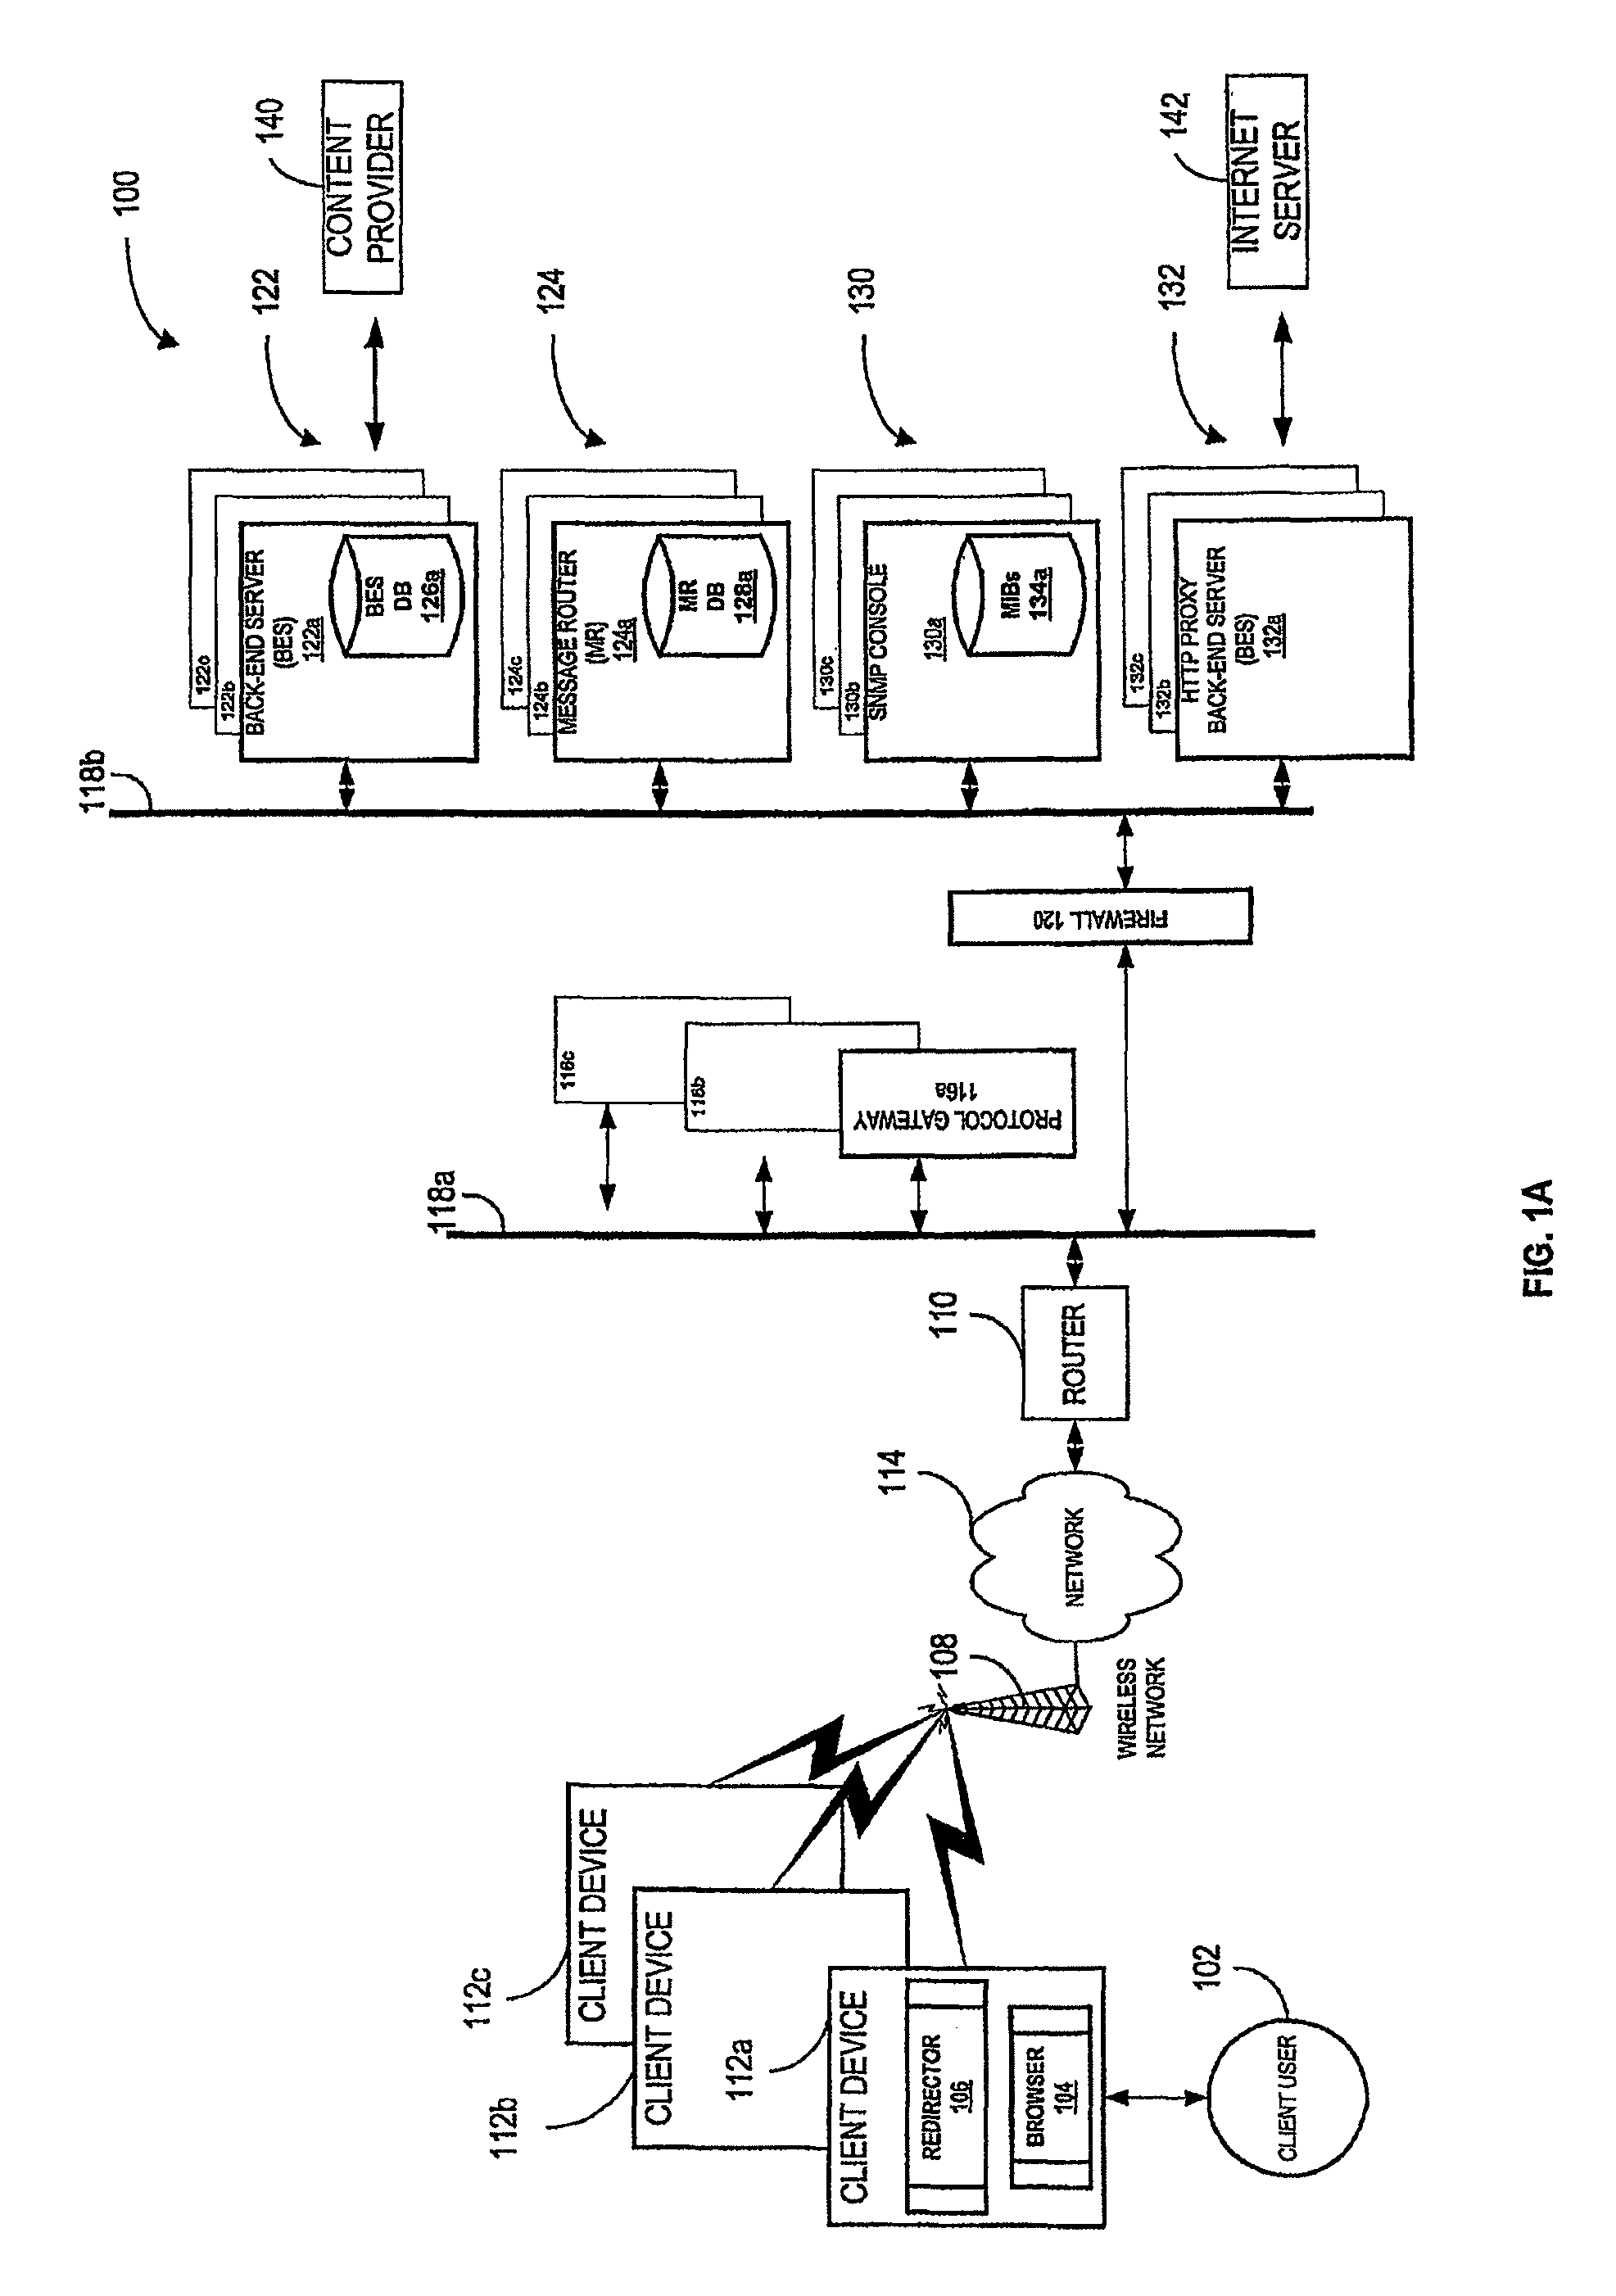 System and method for servers to send alerts to connectionless devices